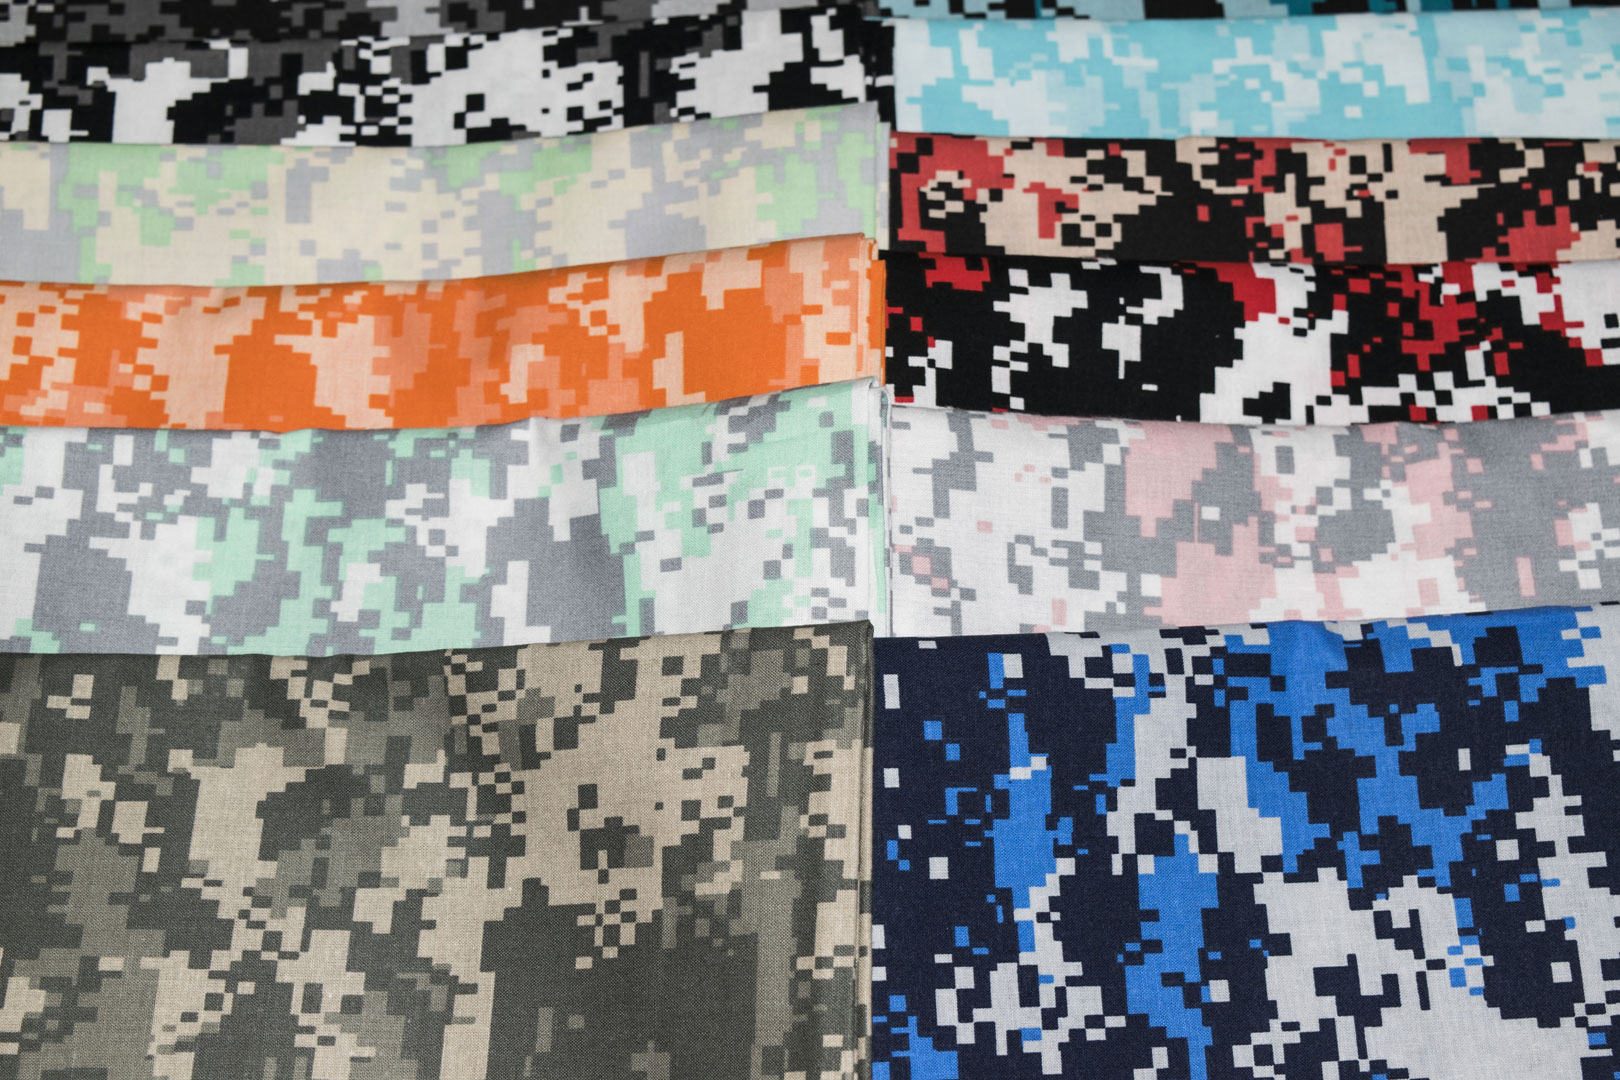   SPW #197: Urban Camouflage (45")   Our Urban Camouflage is finished at 44/45" and is printed on our 68/68 100% Cotton Fabric. 